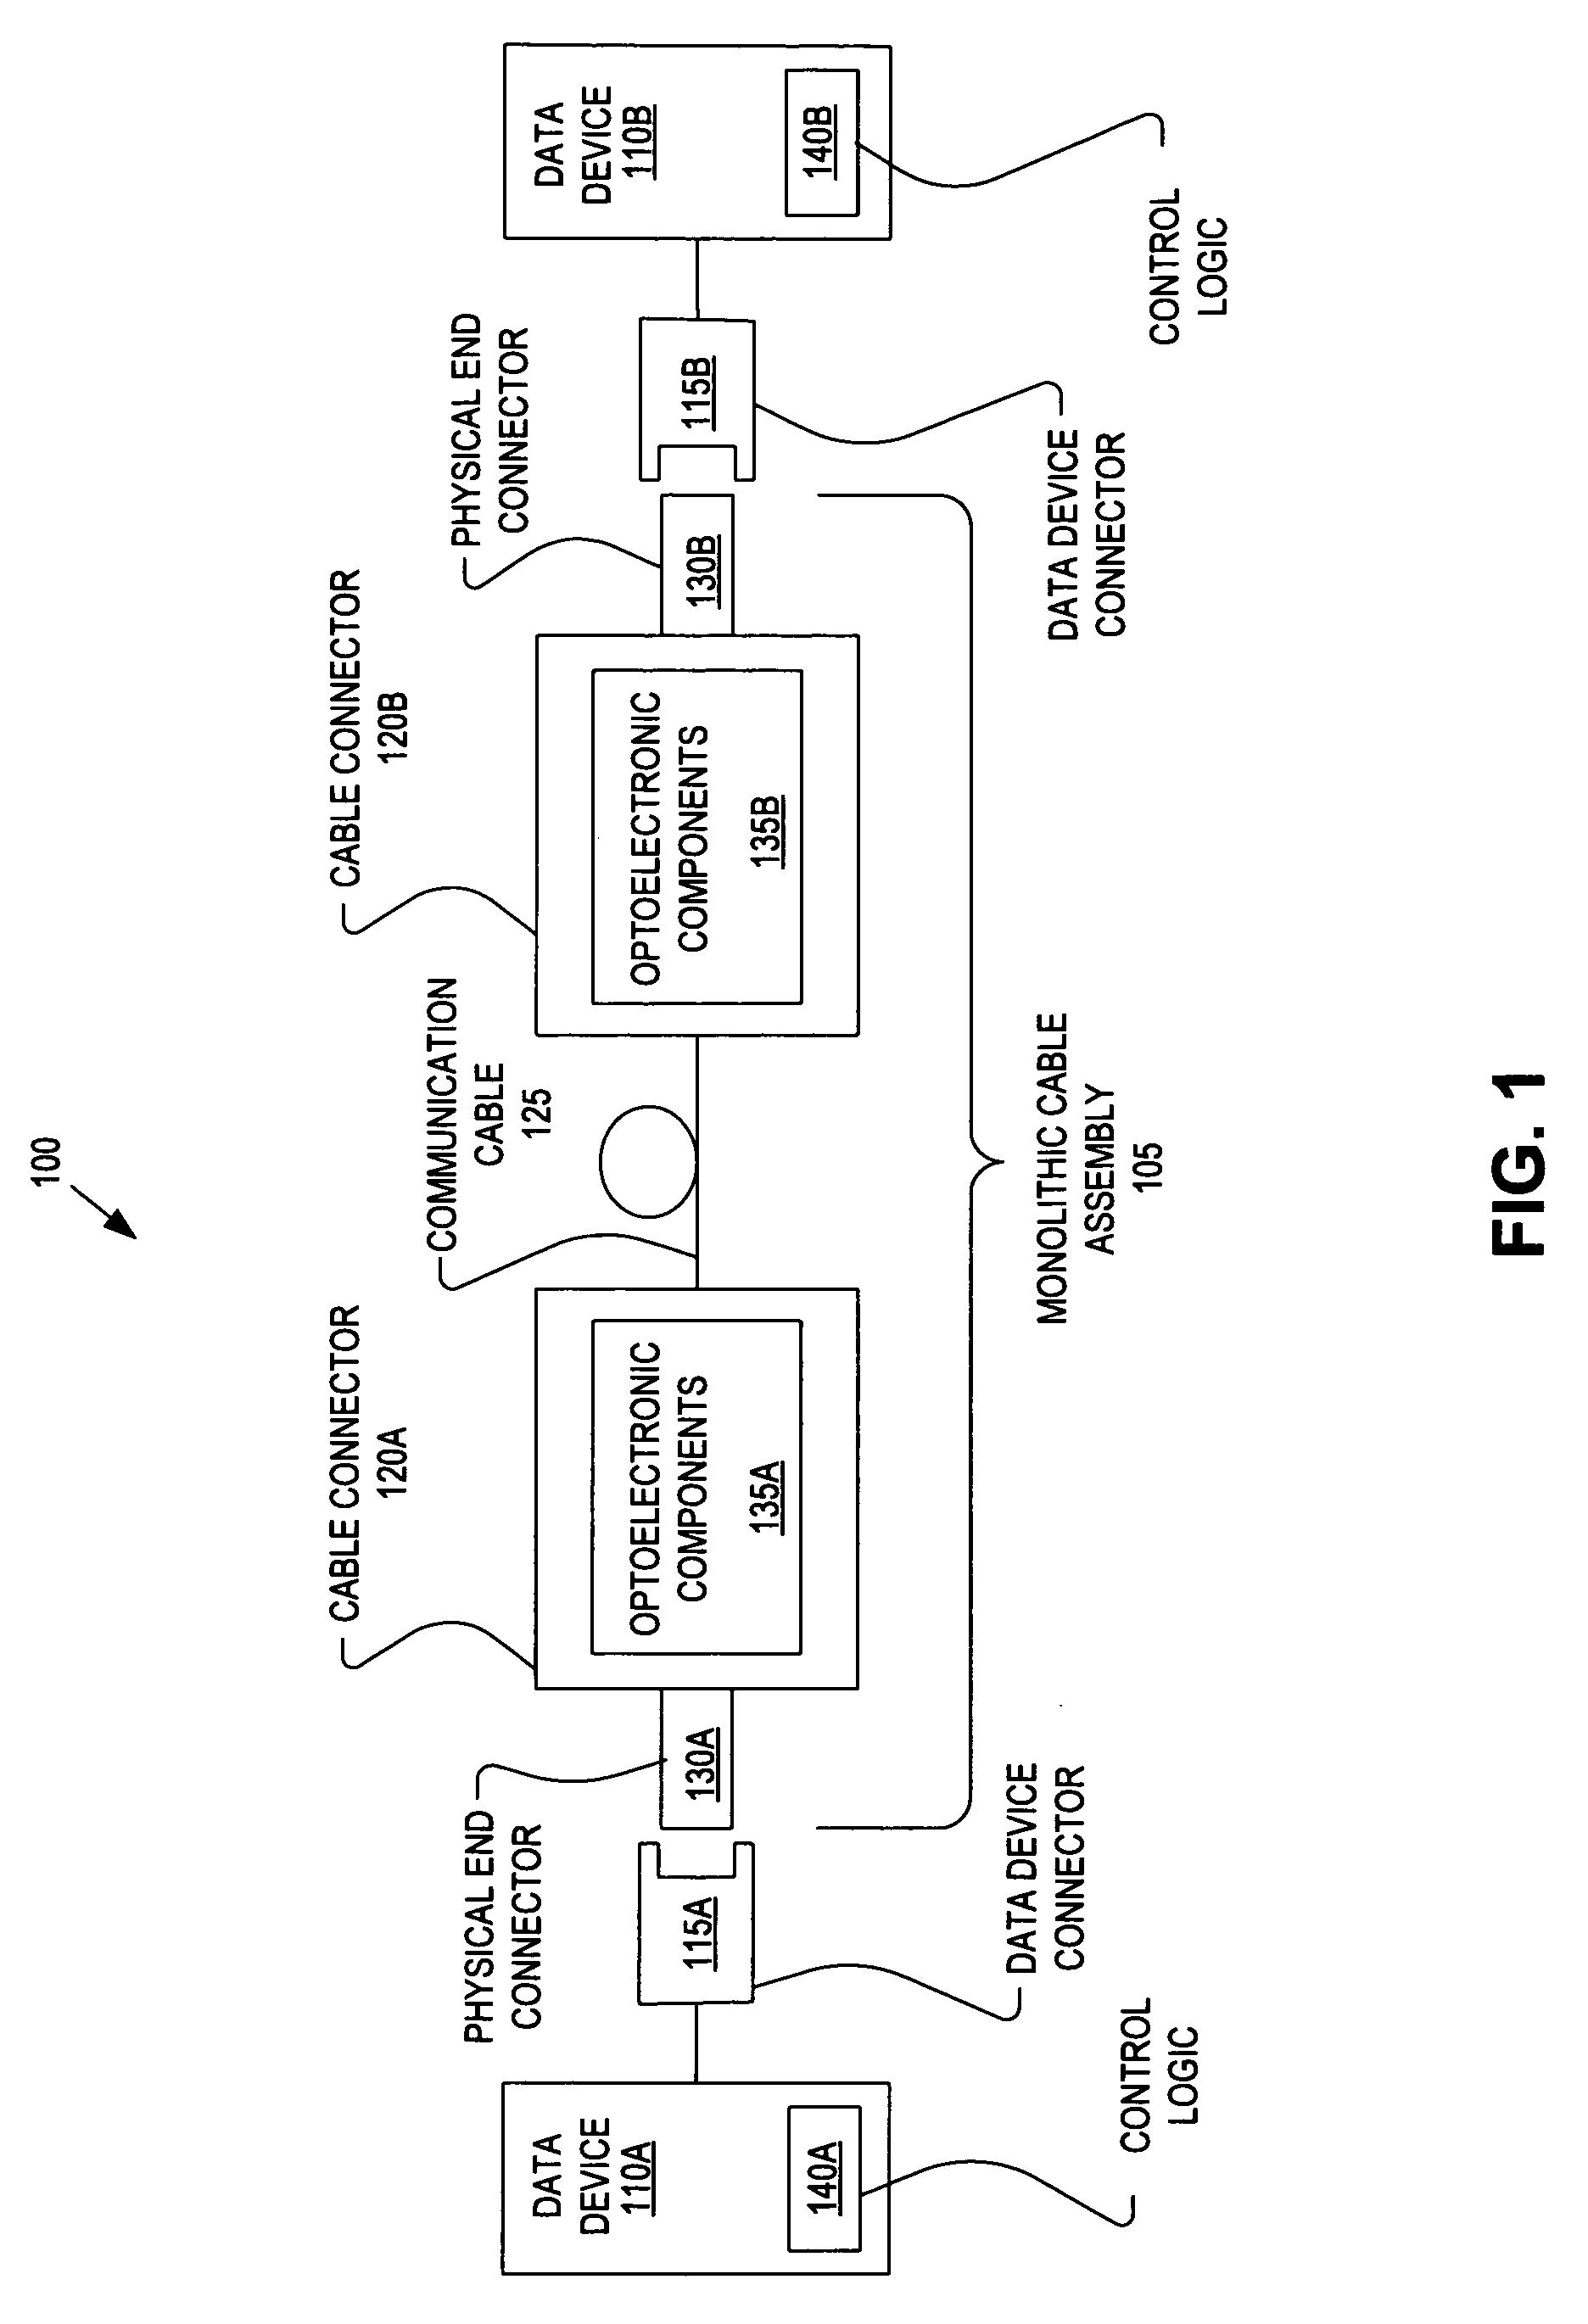 Monolithic active optical cable assembly for data device applications and various connector types